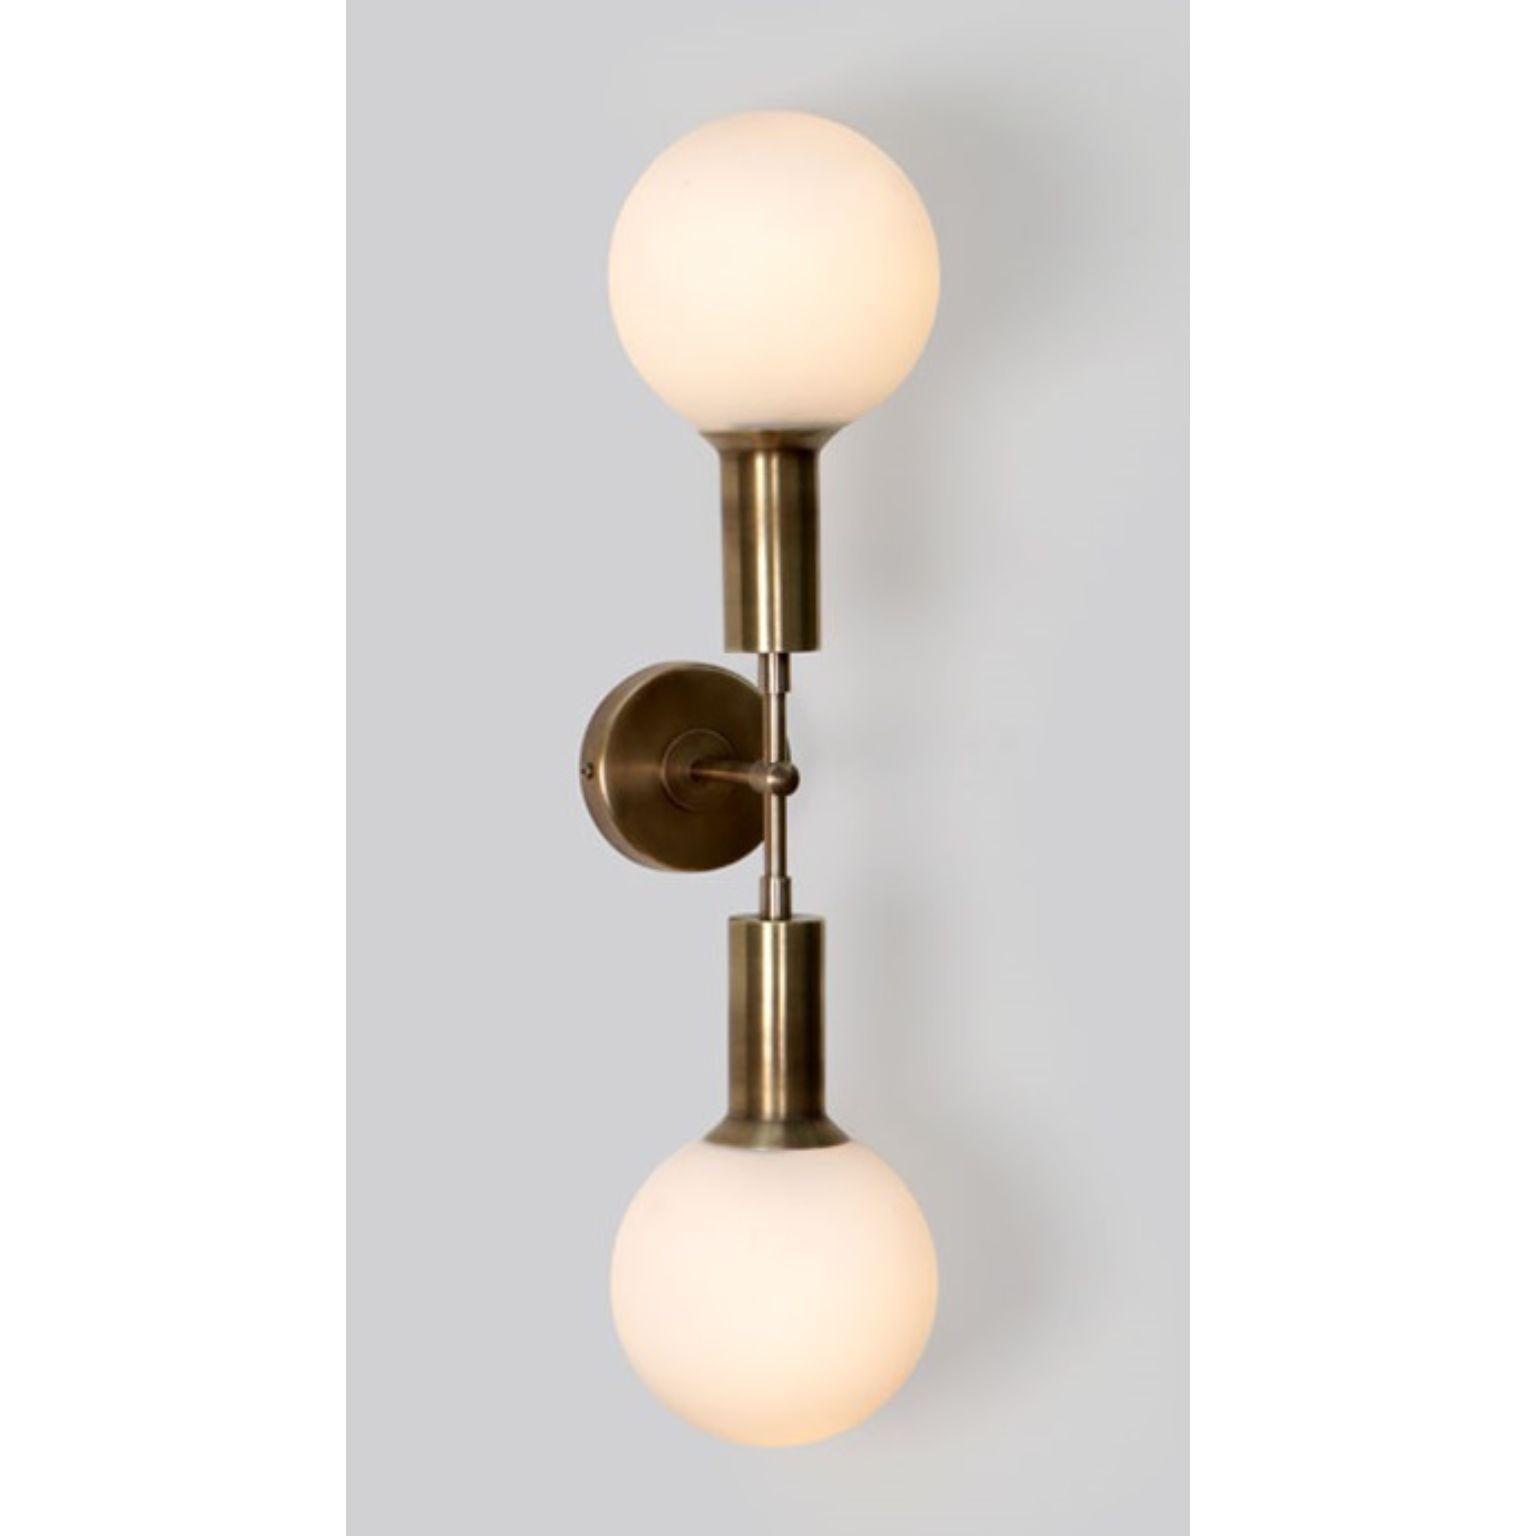 Mod Glass Globe Wall Sconce Two by Lamp Shaper
Dimensions: D 15.5 x W 19 x H 56 cm.
Materials: Brass and glass.

Different finishes available: raw brass, aged brass, burnt brass and brushed brass Please contact us.

All our lamps can be wired